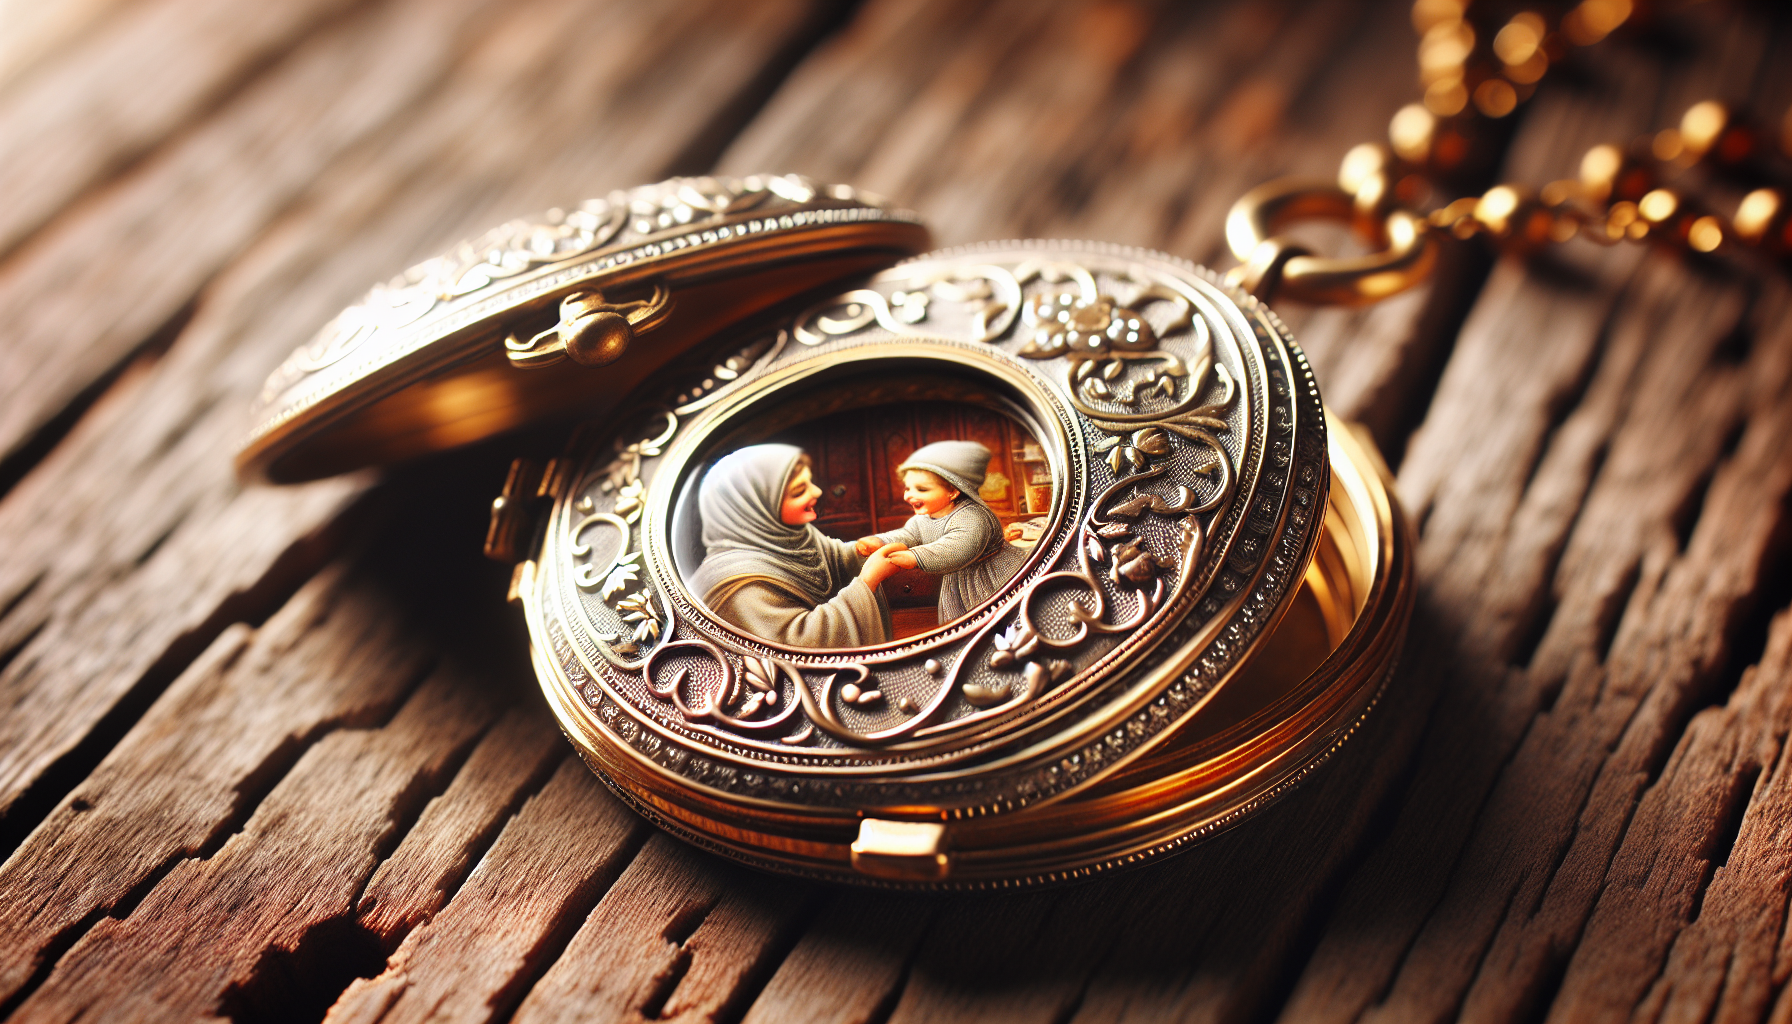 Close-up image of a delicate antique locket, made of polished gold and decorated with intricate engravings. The locket is open, revealing inside the tiny picture of a sentimental scene: a happy Middle